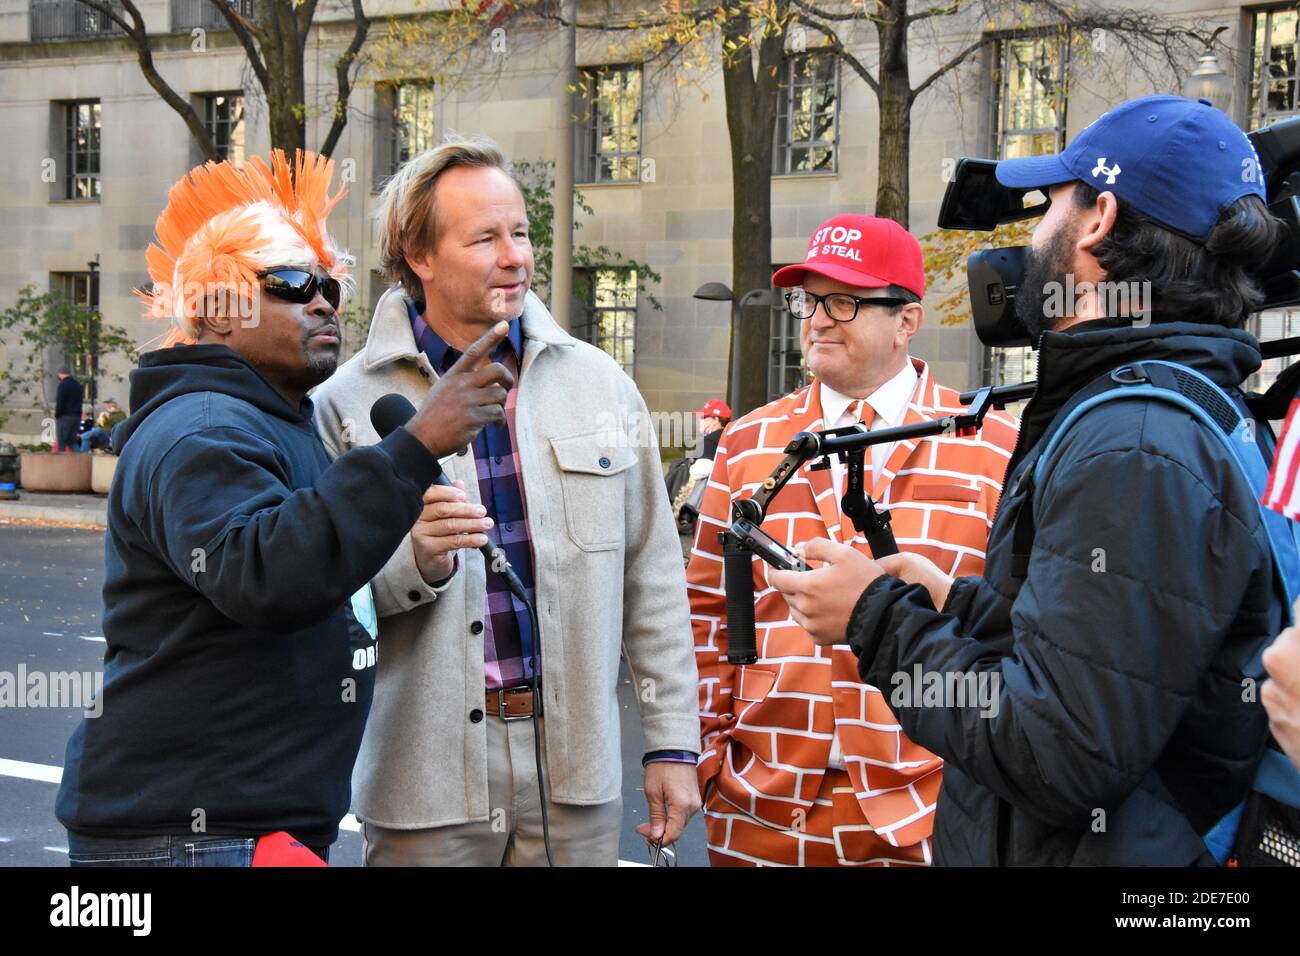 Washington DC. Nov 14, 2020. Million Maga March. Right side news reporter interviewing a black man and a man in 'border wall suit' Mr. Blake Marnell. Stock Photo